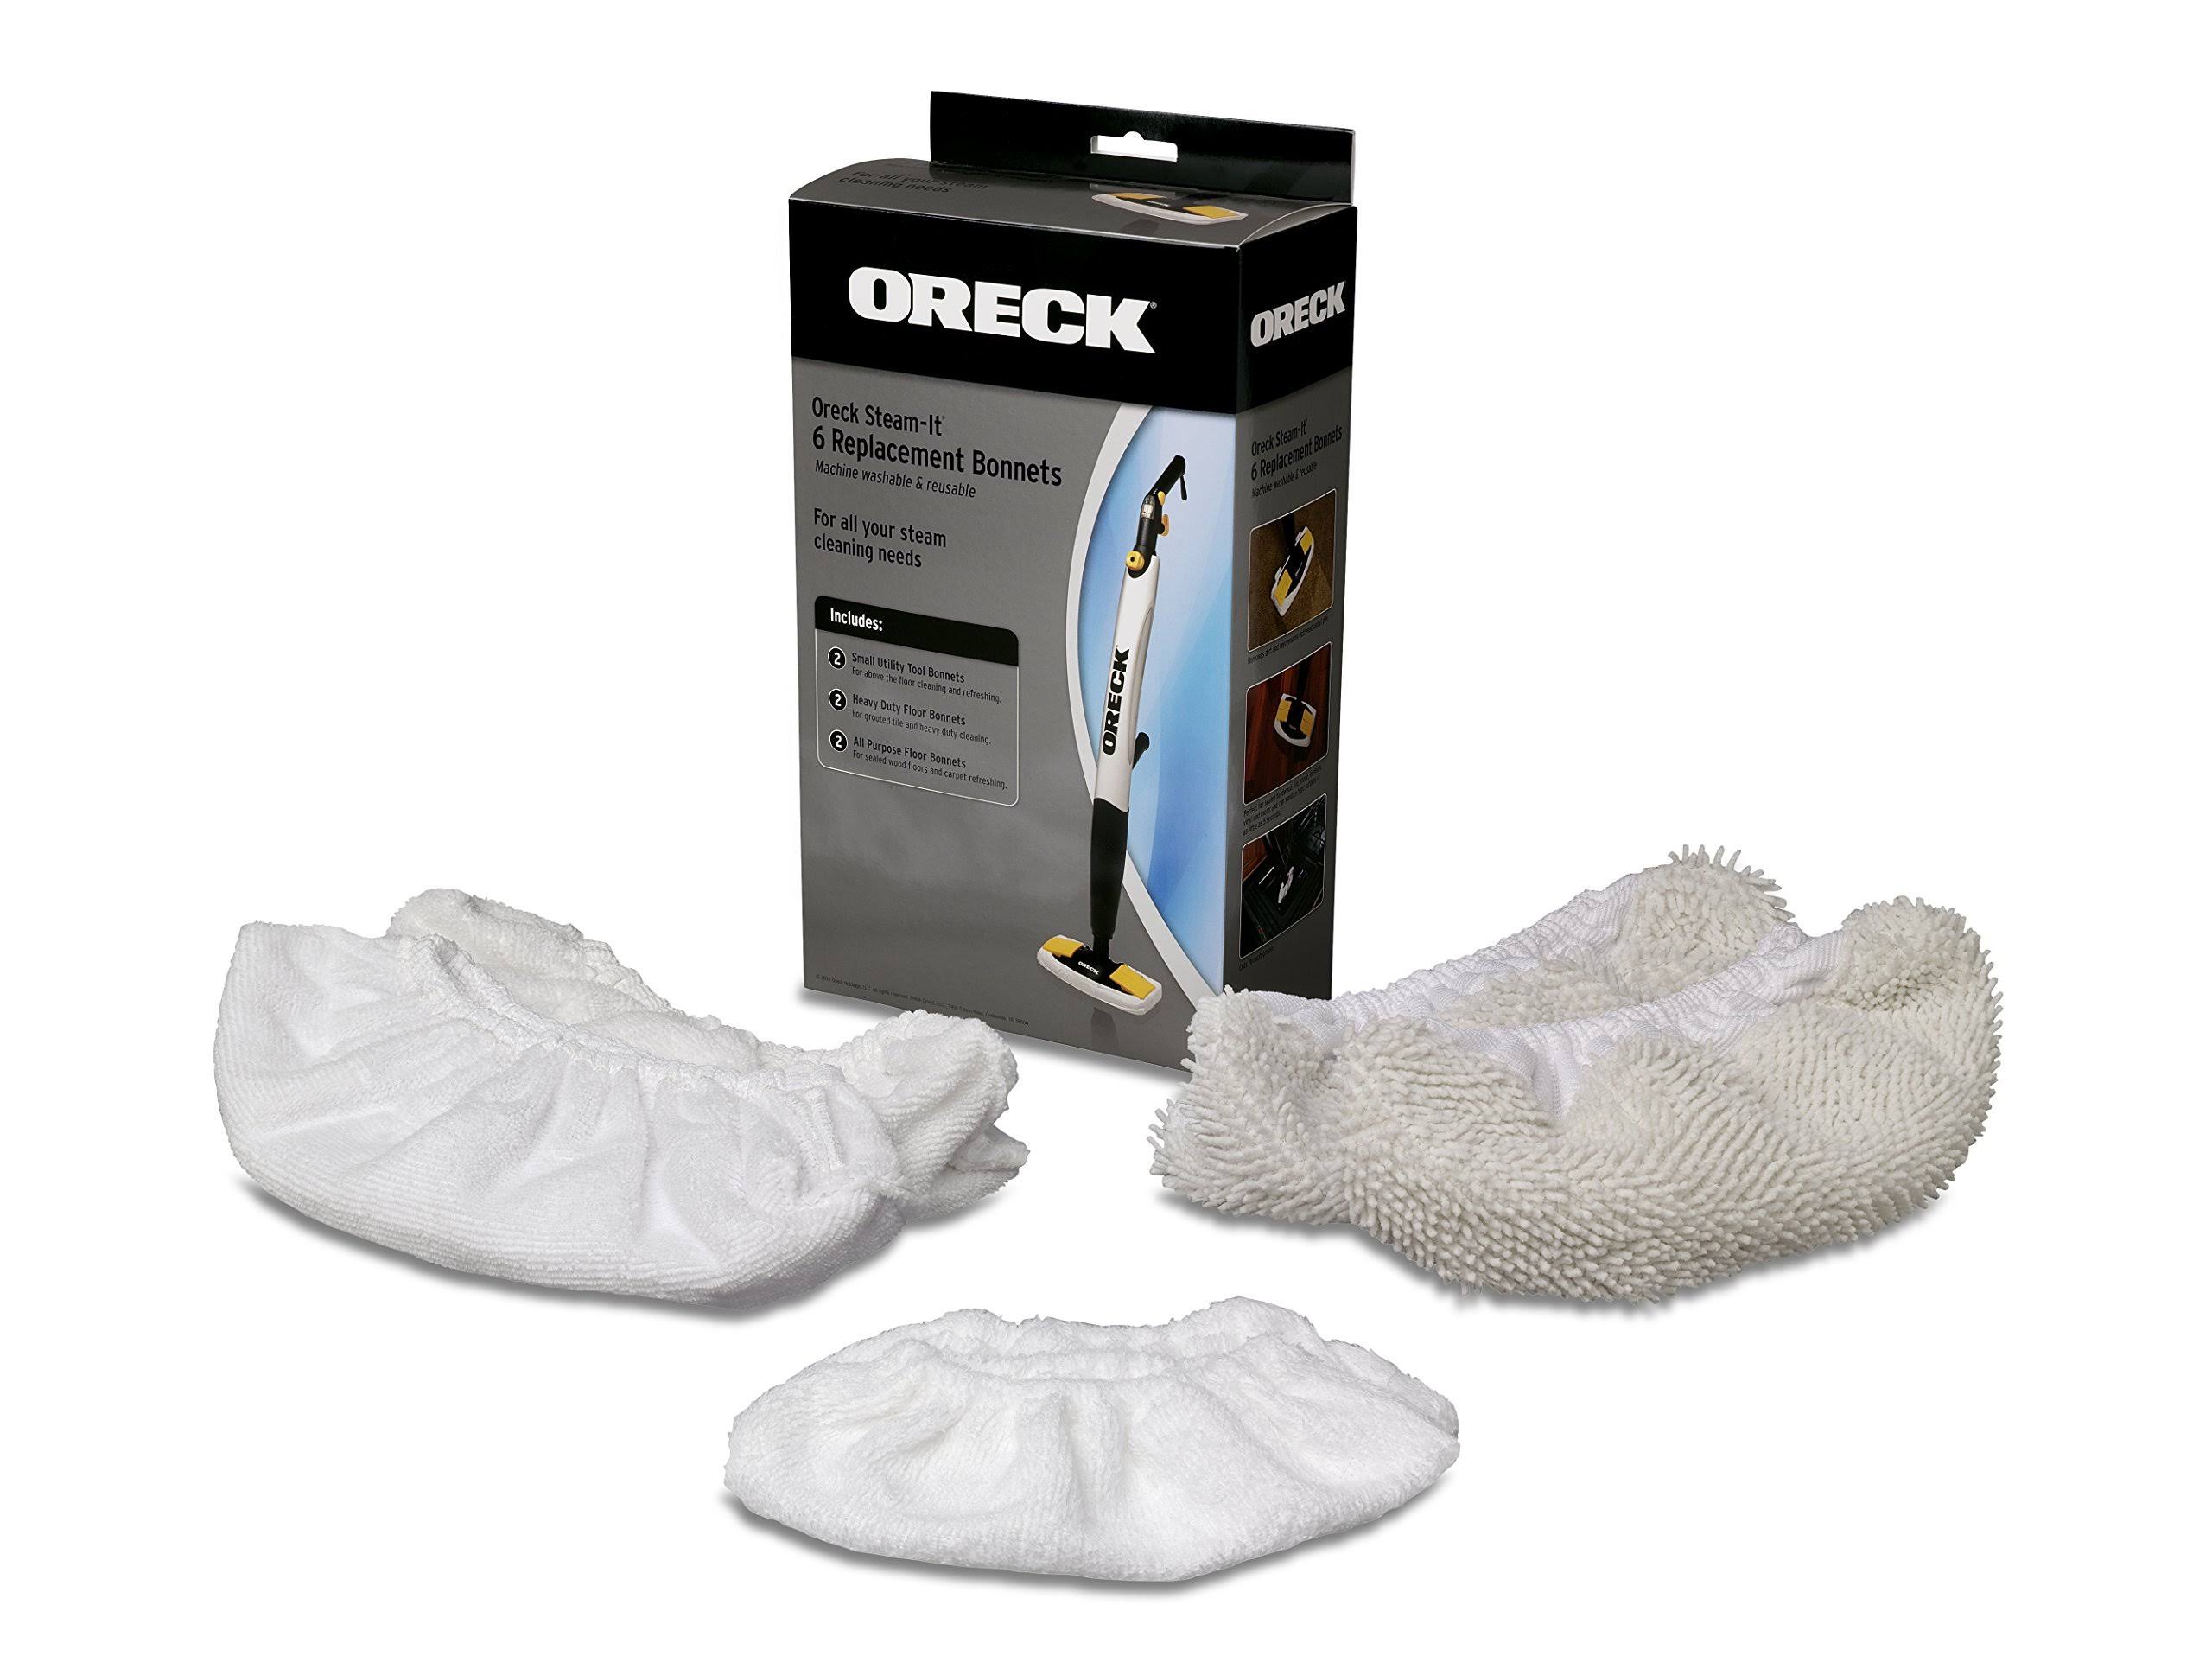 Oreck Steam-It Microfiber Replacement bonnets - Steamkitlr - Set of 6 Includes A 2 Heavy Duty Floor Bonnets, 2 All Purpose Floor Bonnets, and 2